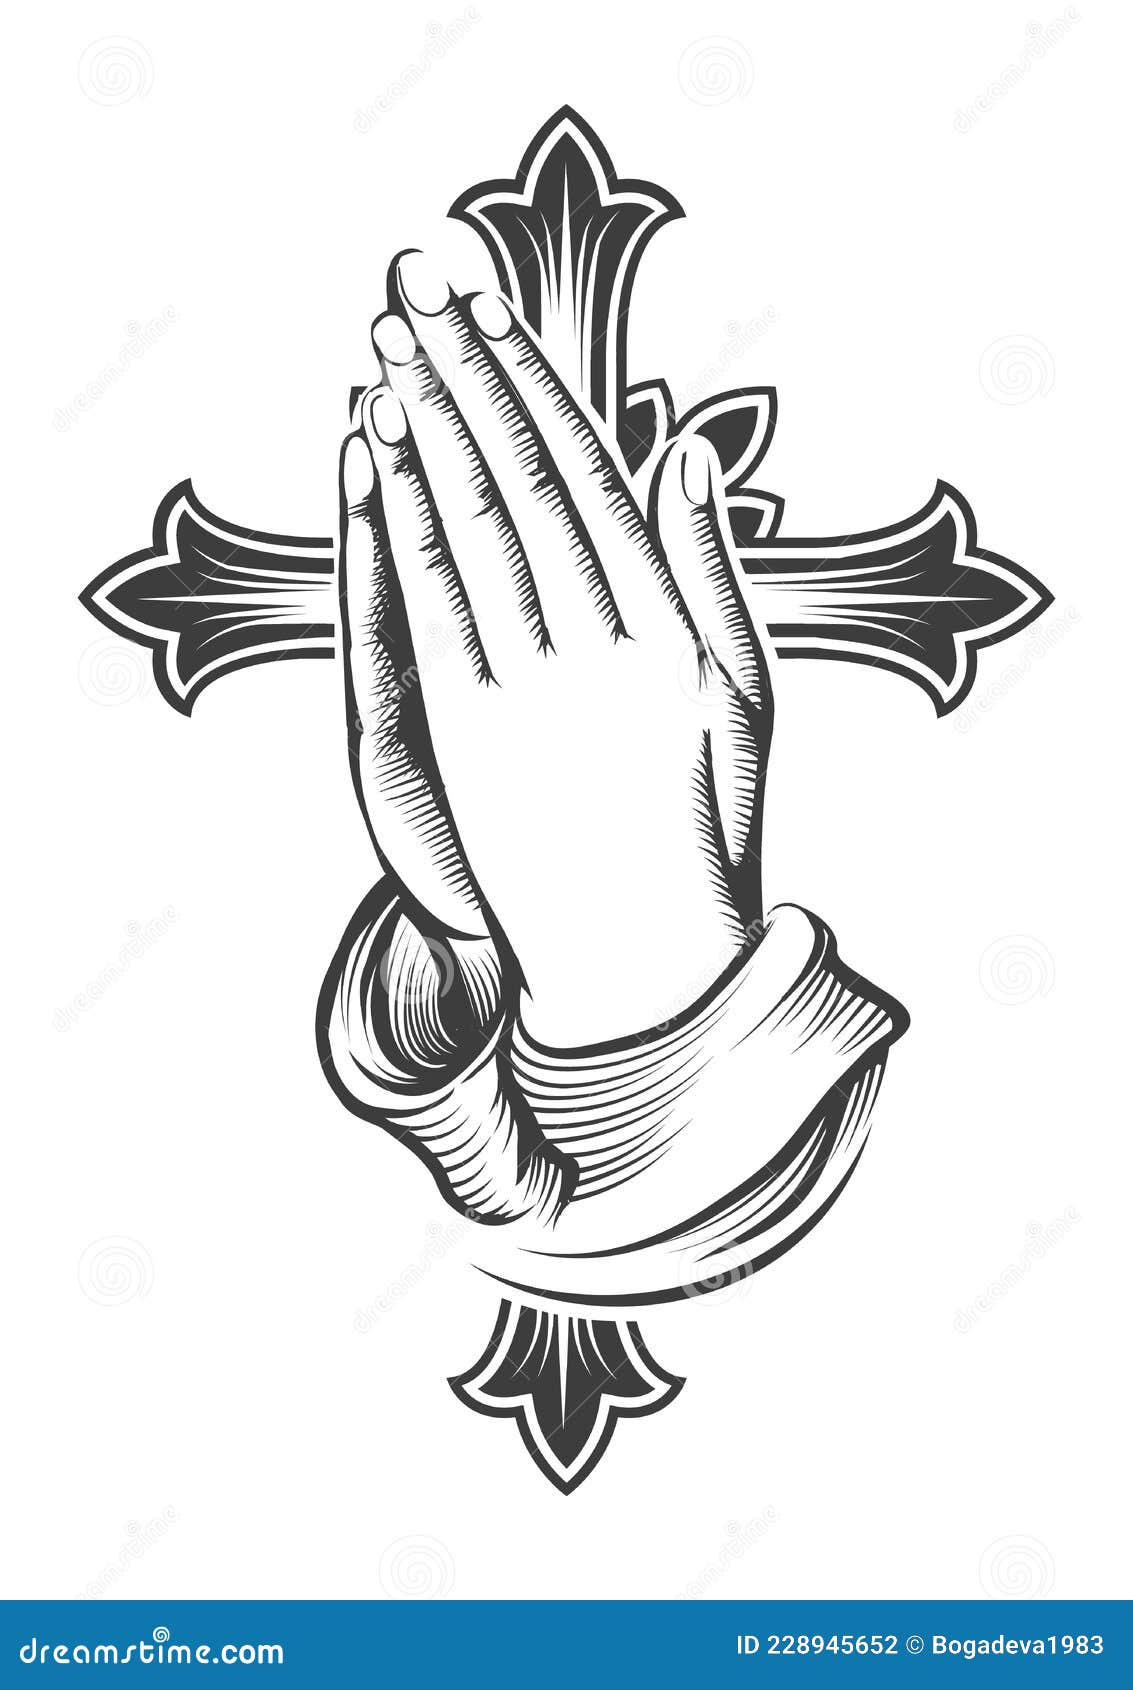 Praying Hands And Cross Engraving Tattoo Stock Vector Illustration Of